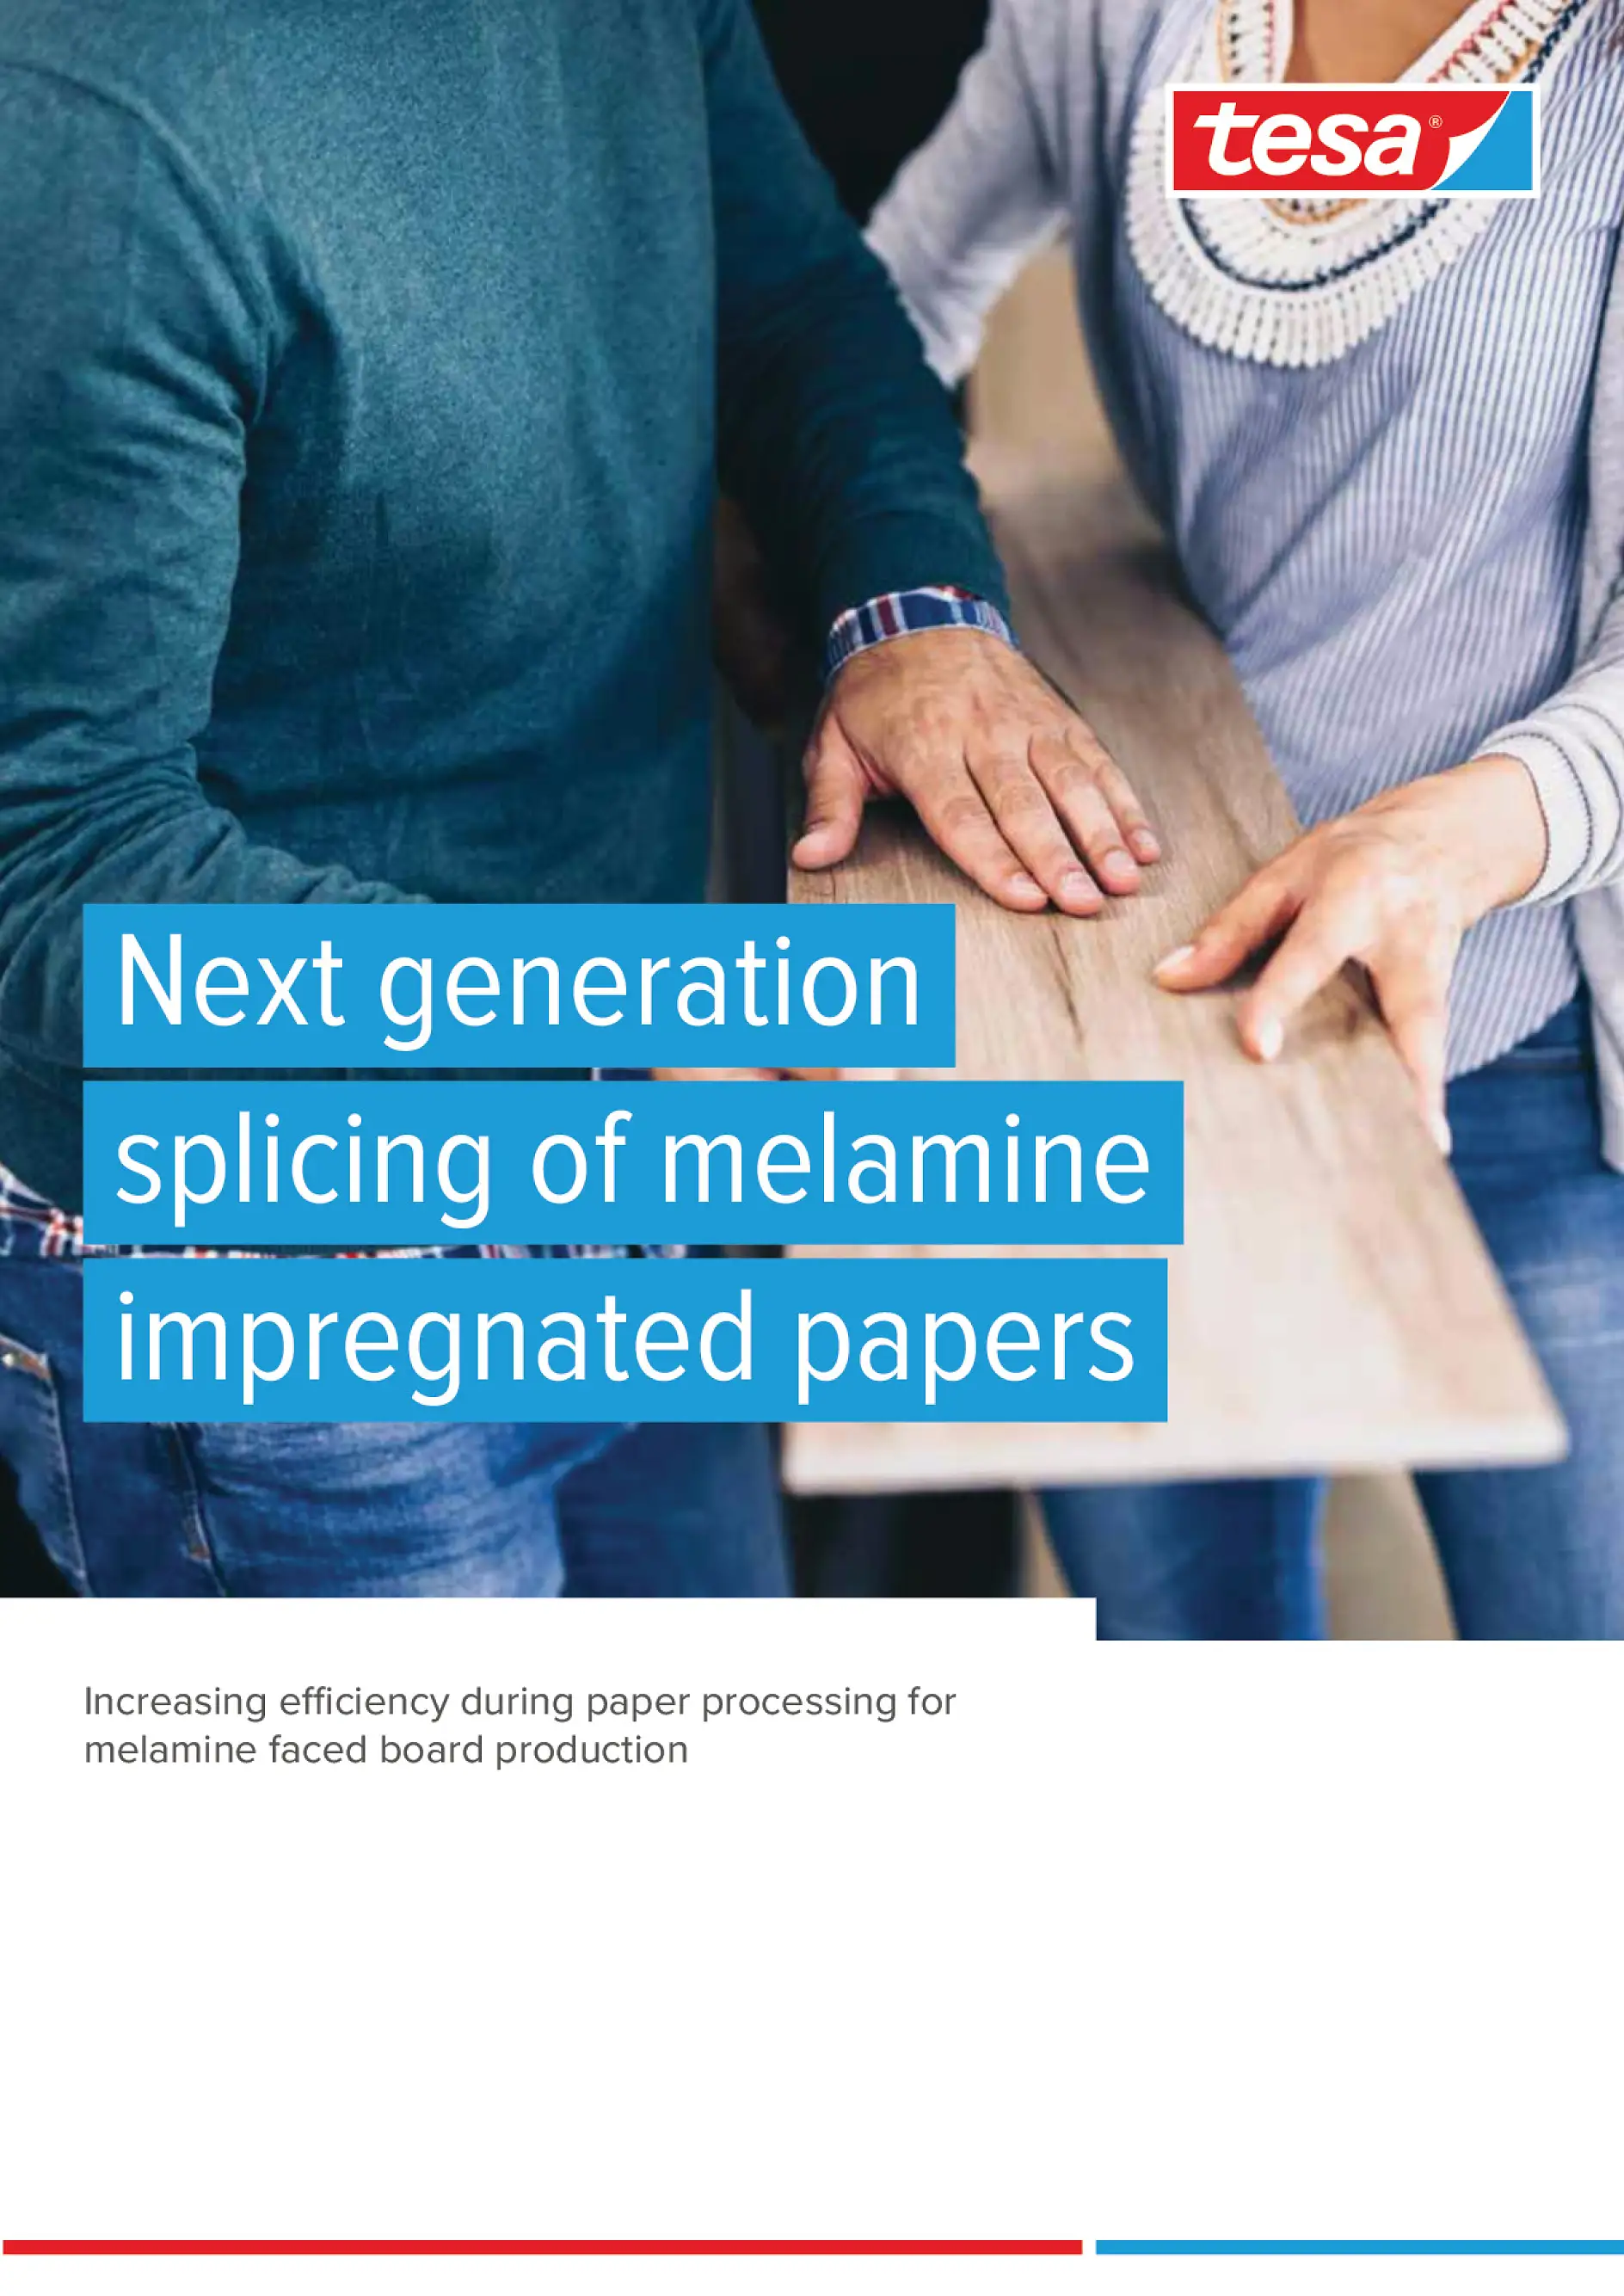 Splicing of melamine impregnated papers